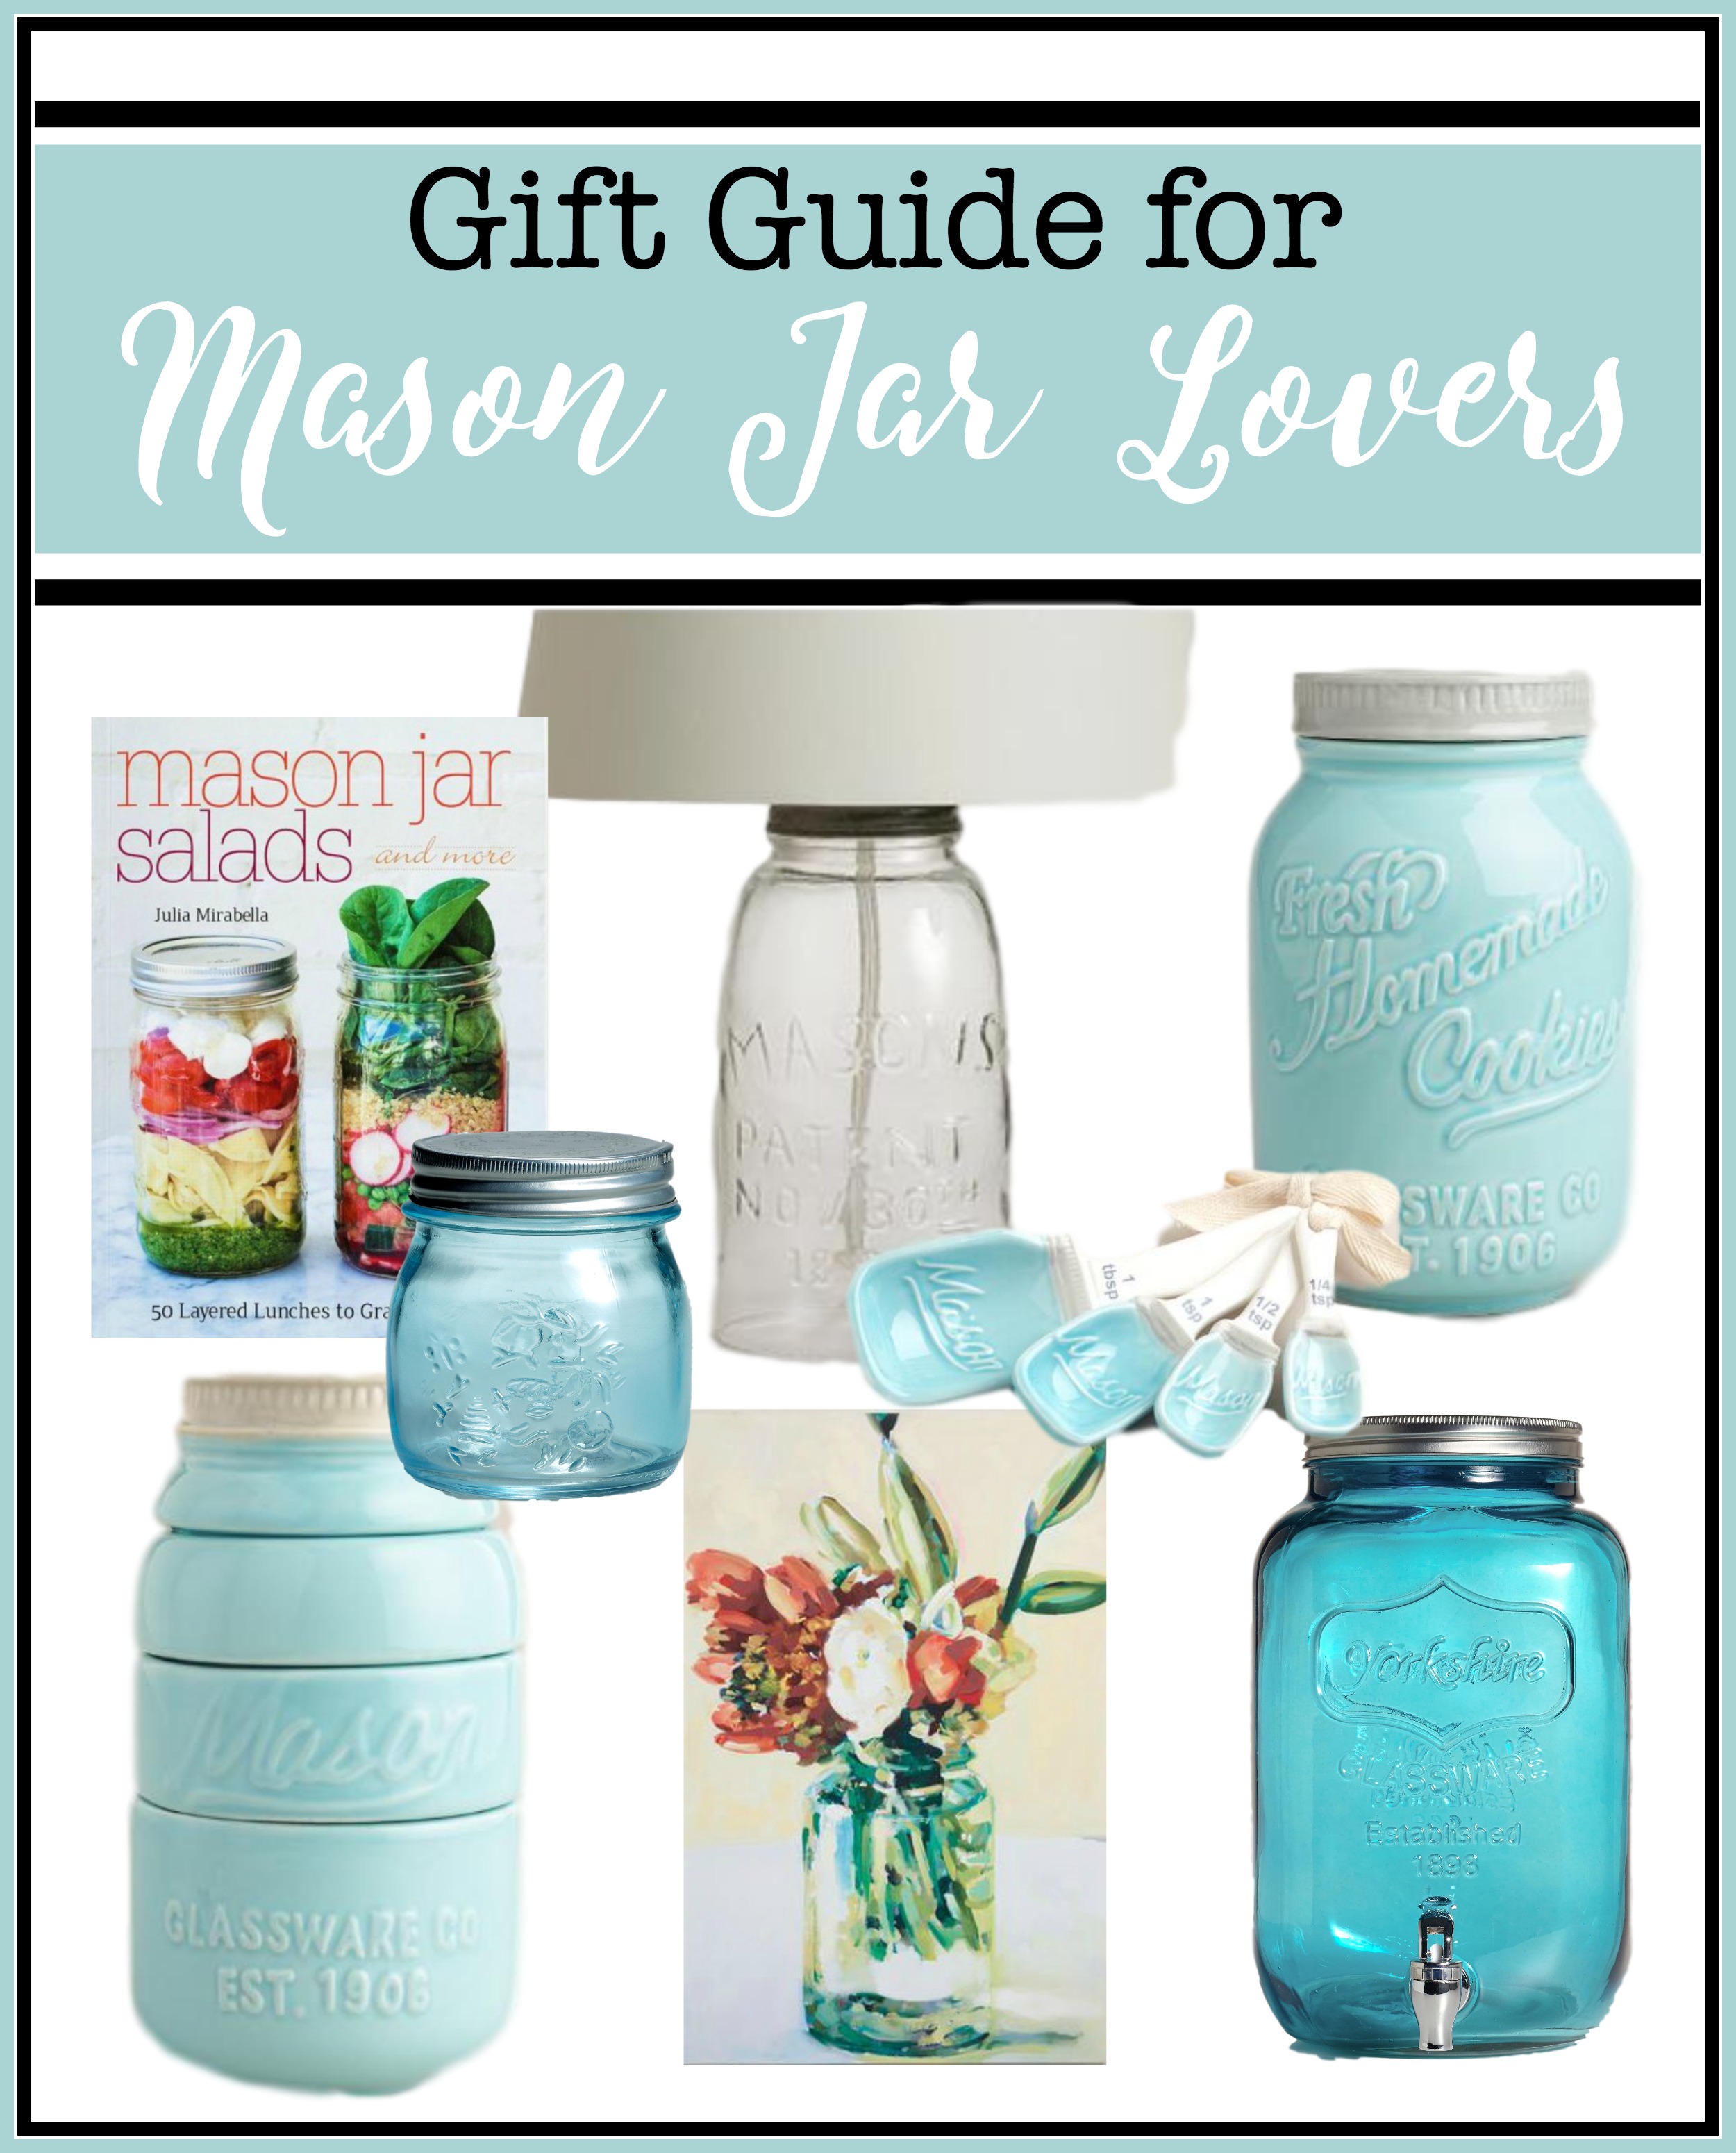 Ultimate Gift Guide for Mason Jar Lovers | The Everyday Home | www.everydayhomeblog.com